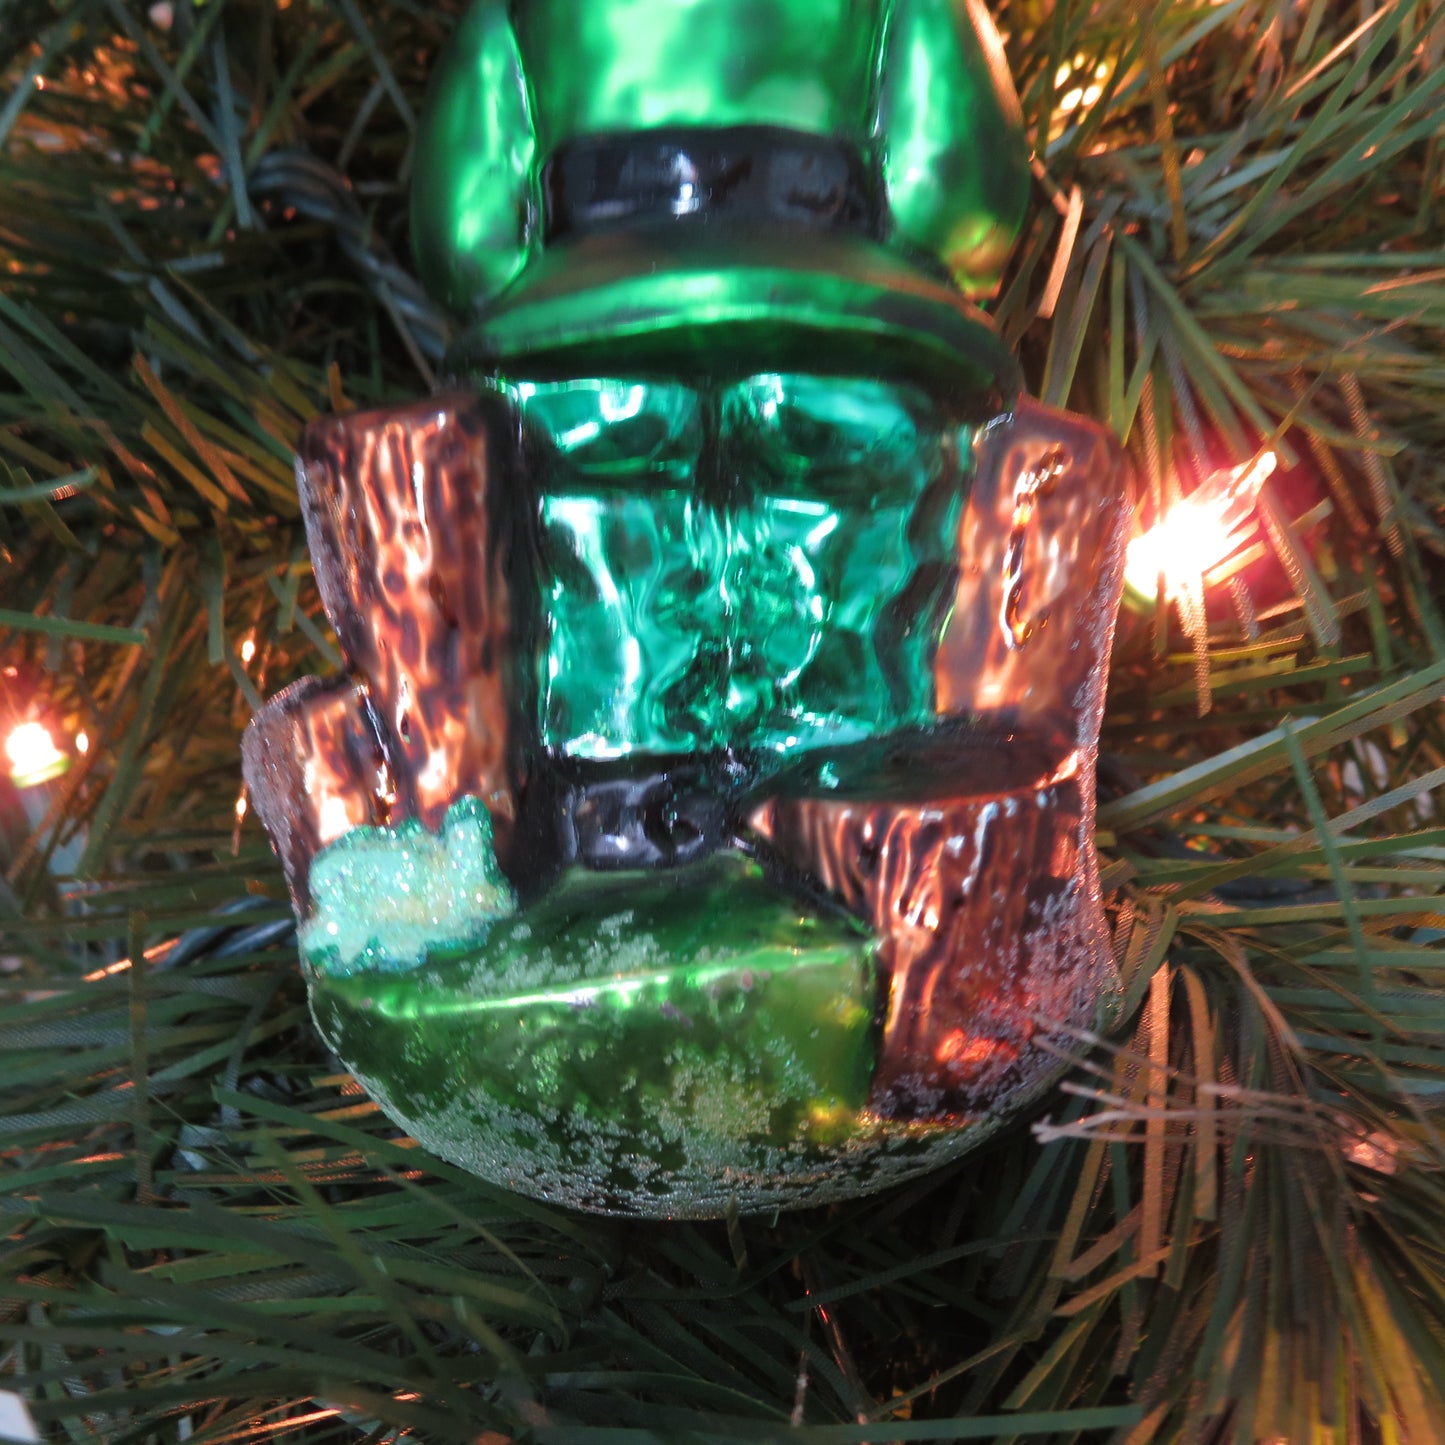 Vintage Leprechaun Glass Ornament Christopher Radko Tall N Stout O'leary St Patrick's Day Little Gems Green Christmas 2000 - At Grandma's Table